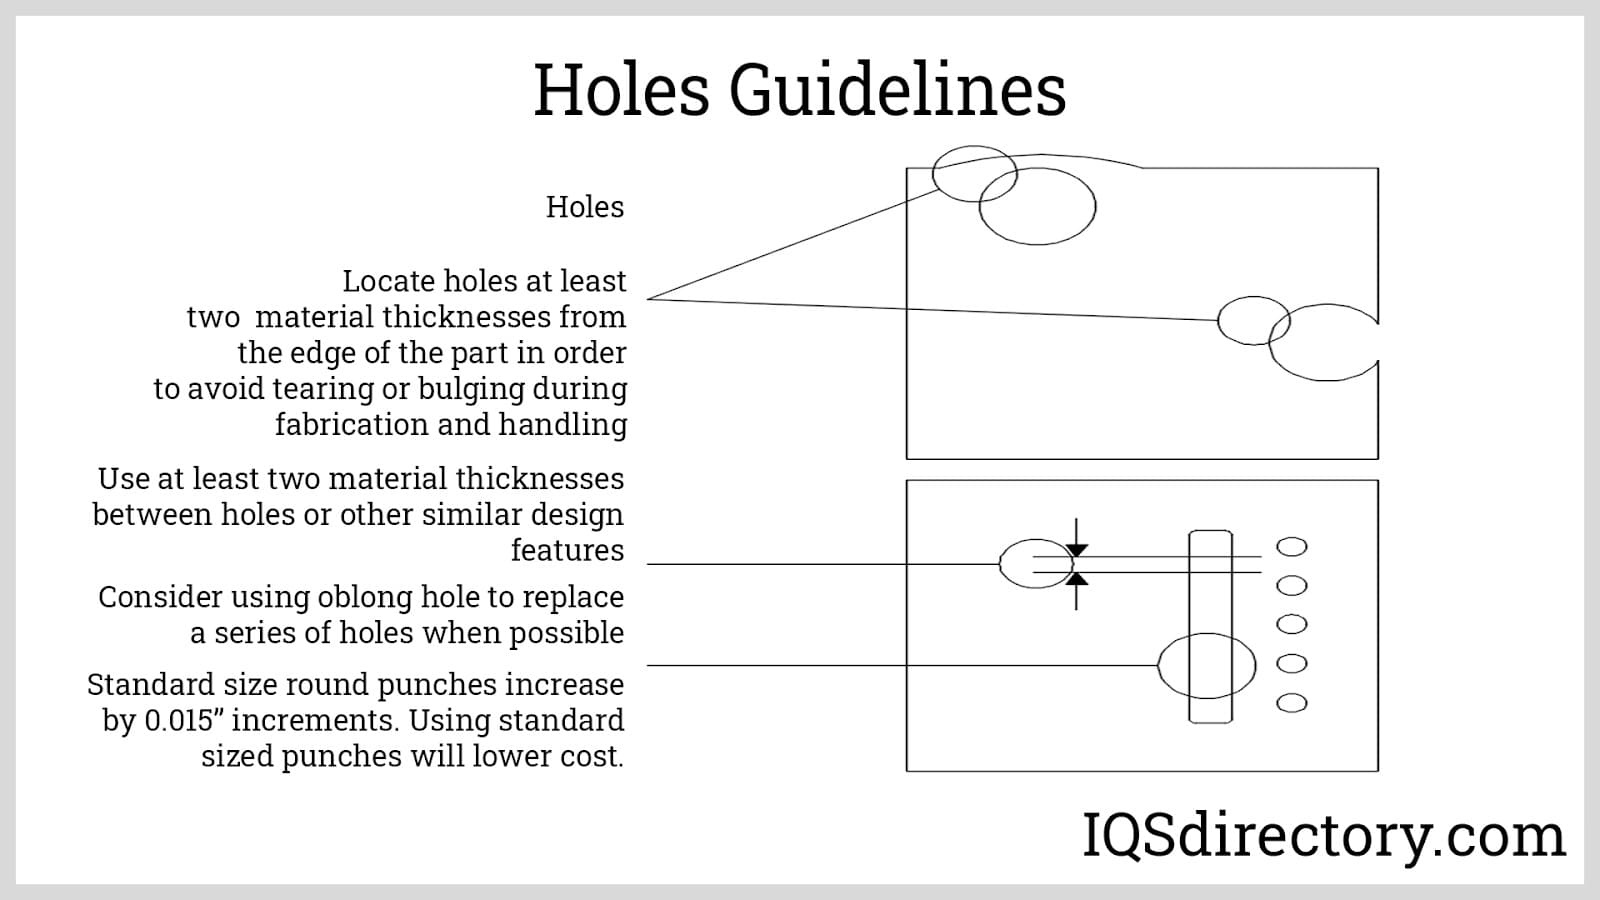 Holes Guidelines